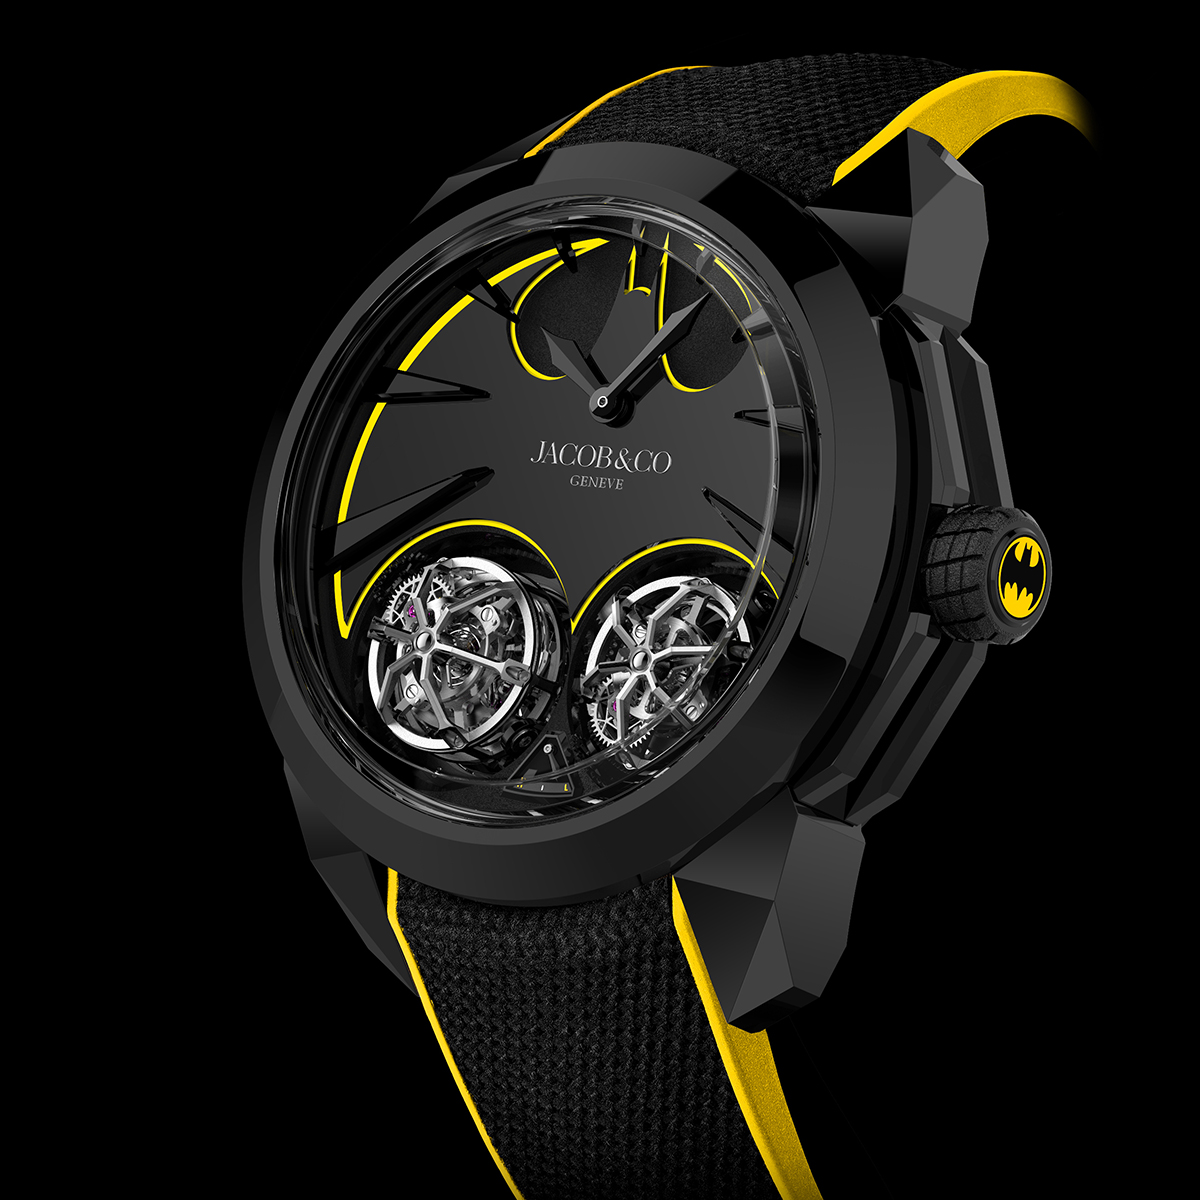 Jacob & Co. Releases The Limited Edition Gotham City Timepiece Inspired By Batman